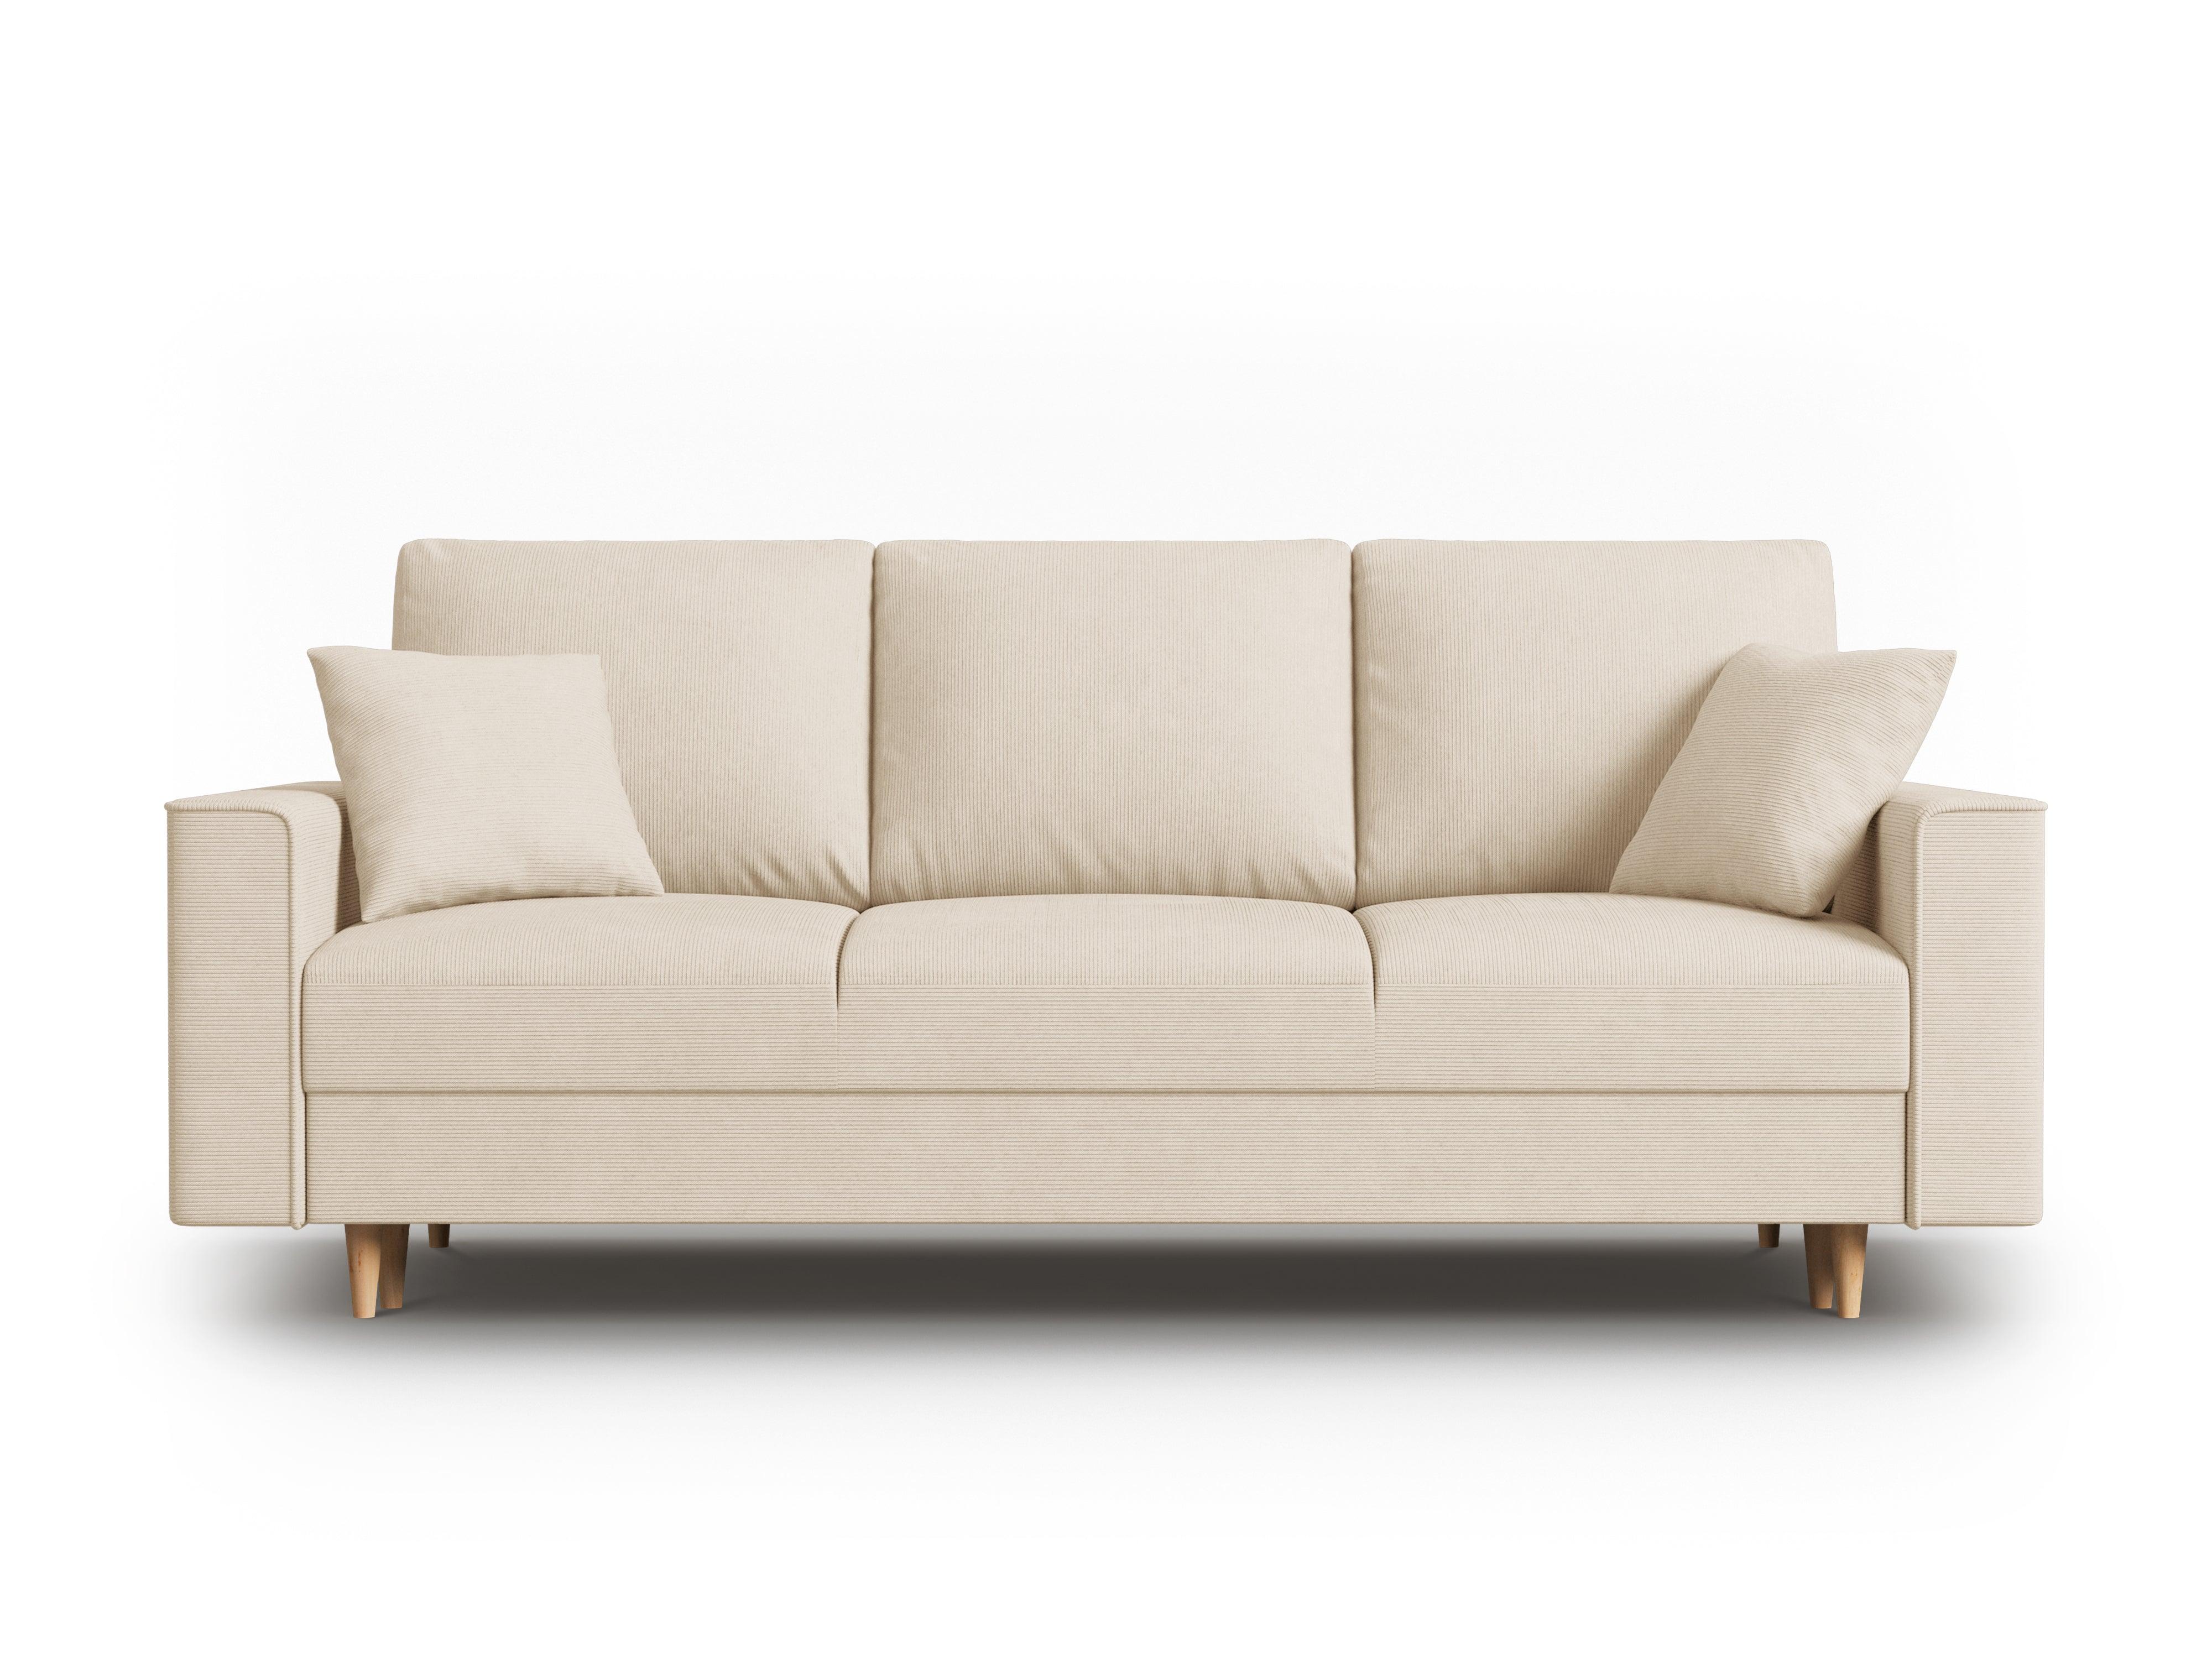 Sofa With Bed Function And Box, "Cartadera", 3 Seats, 222x100x92
Made in Europe, Mazzini Sofas, Eye on Design